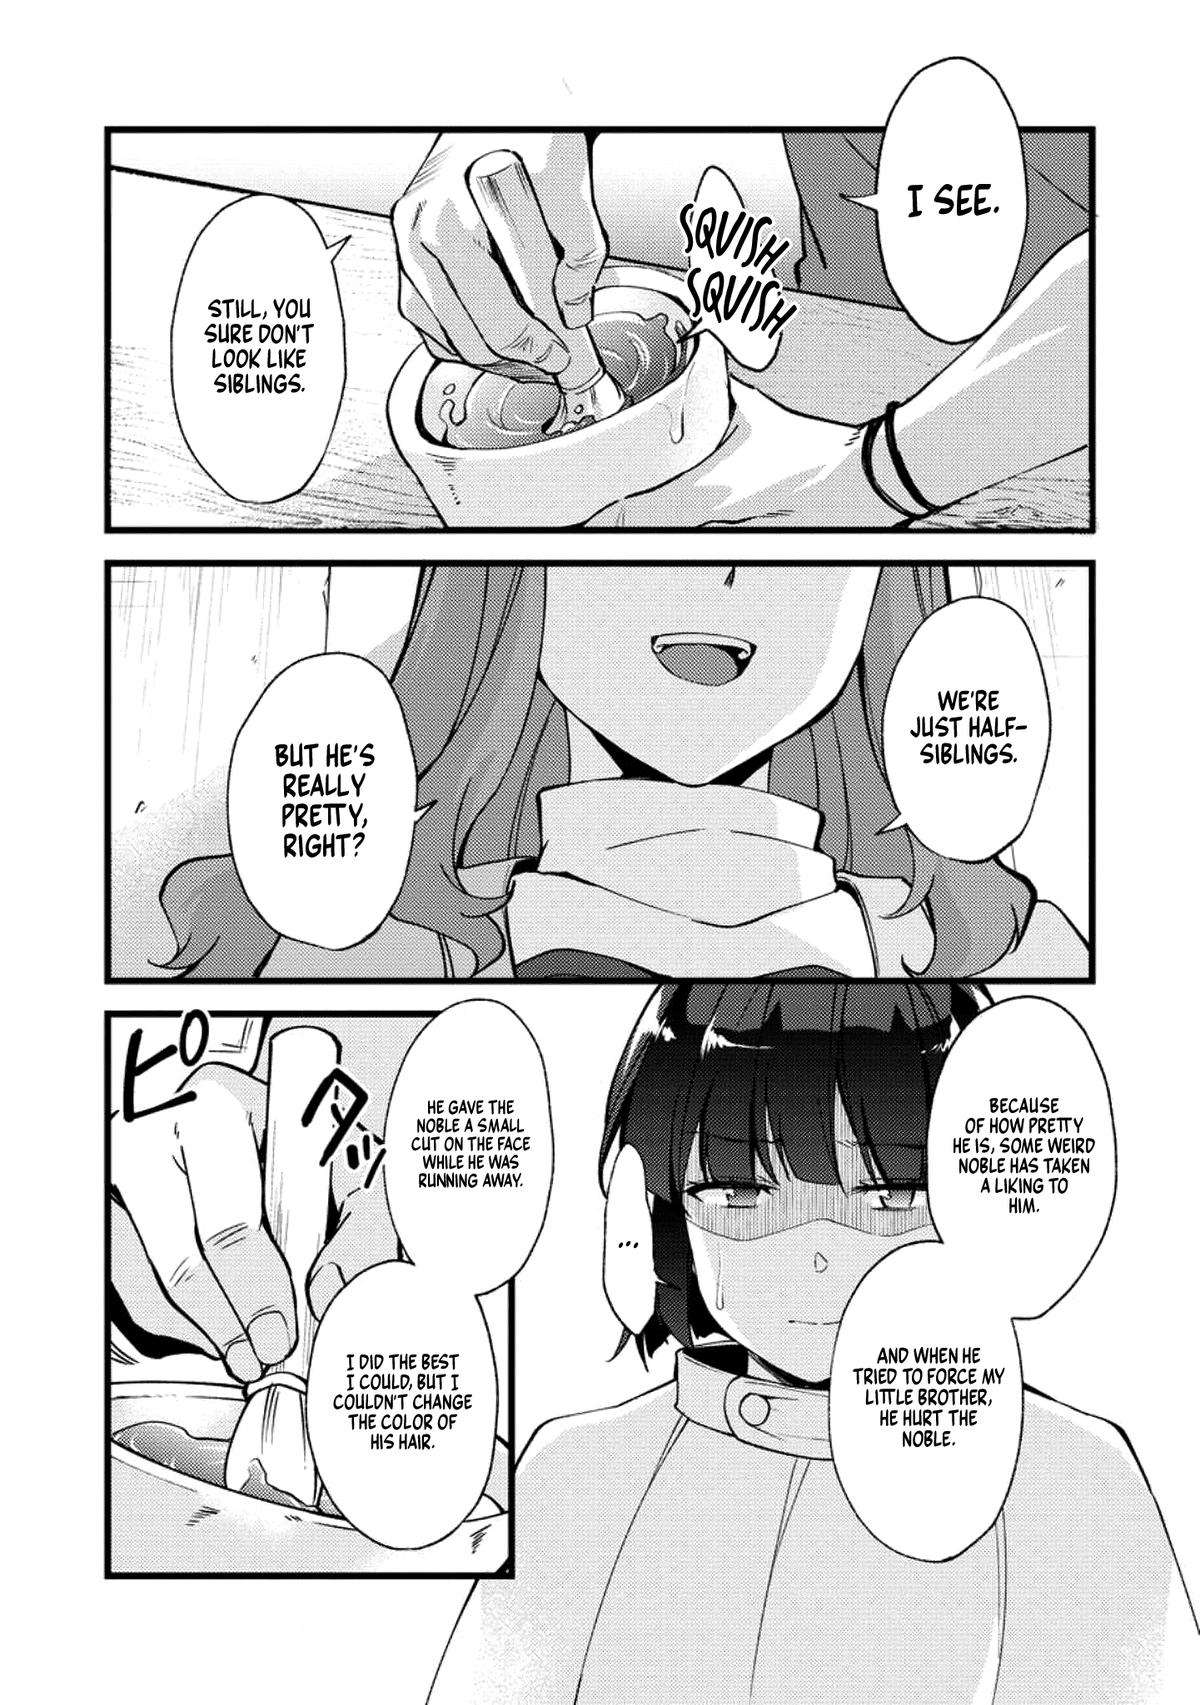 A Sword Master Childhood Friend Power Harassed Me Harshly - chapter 21 - #3